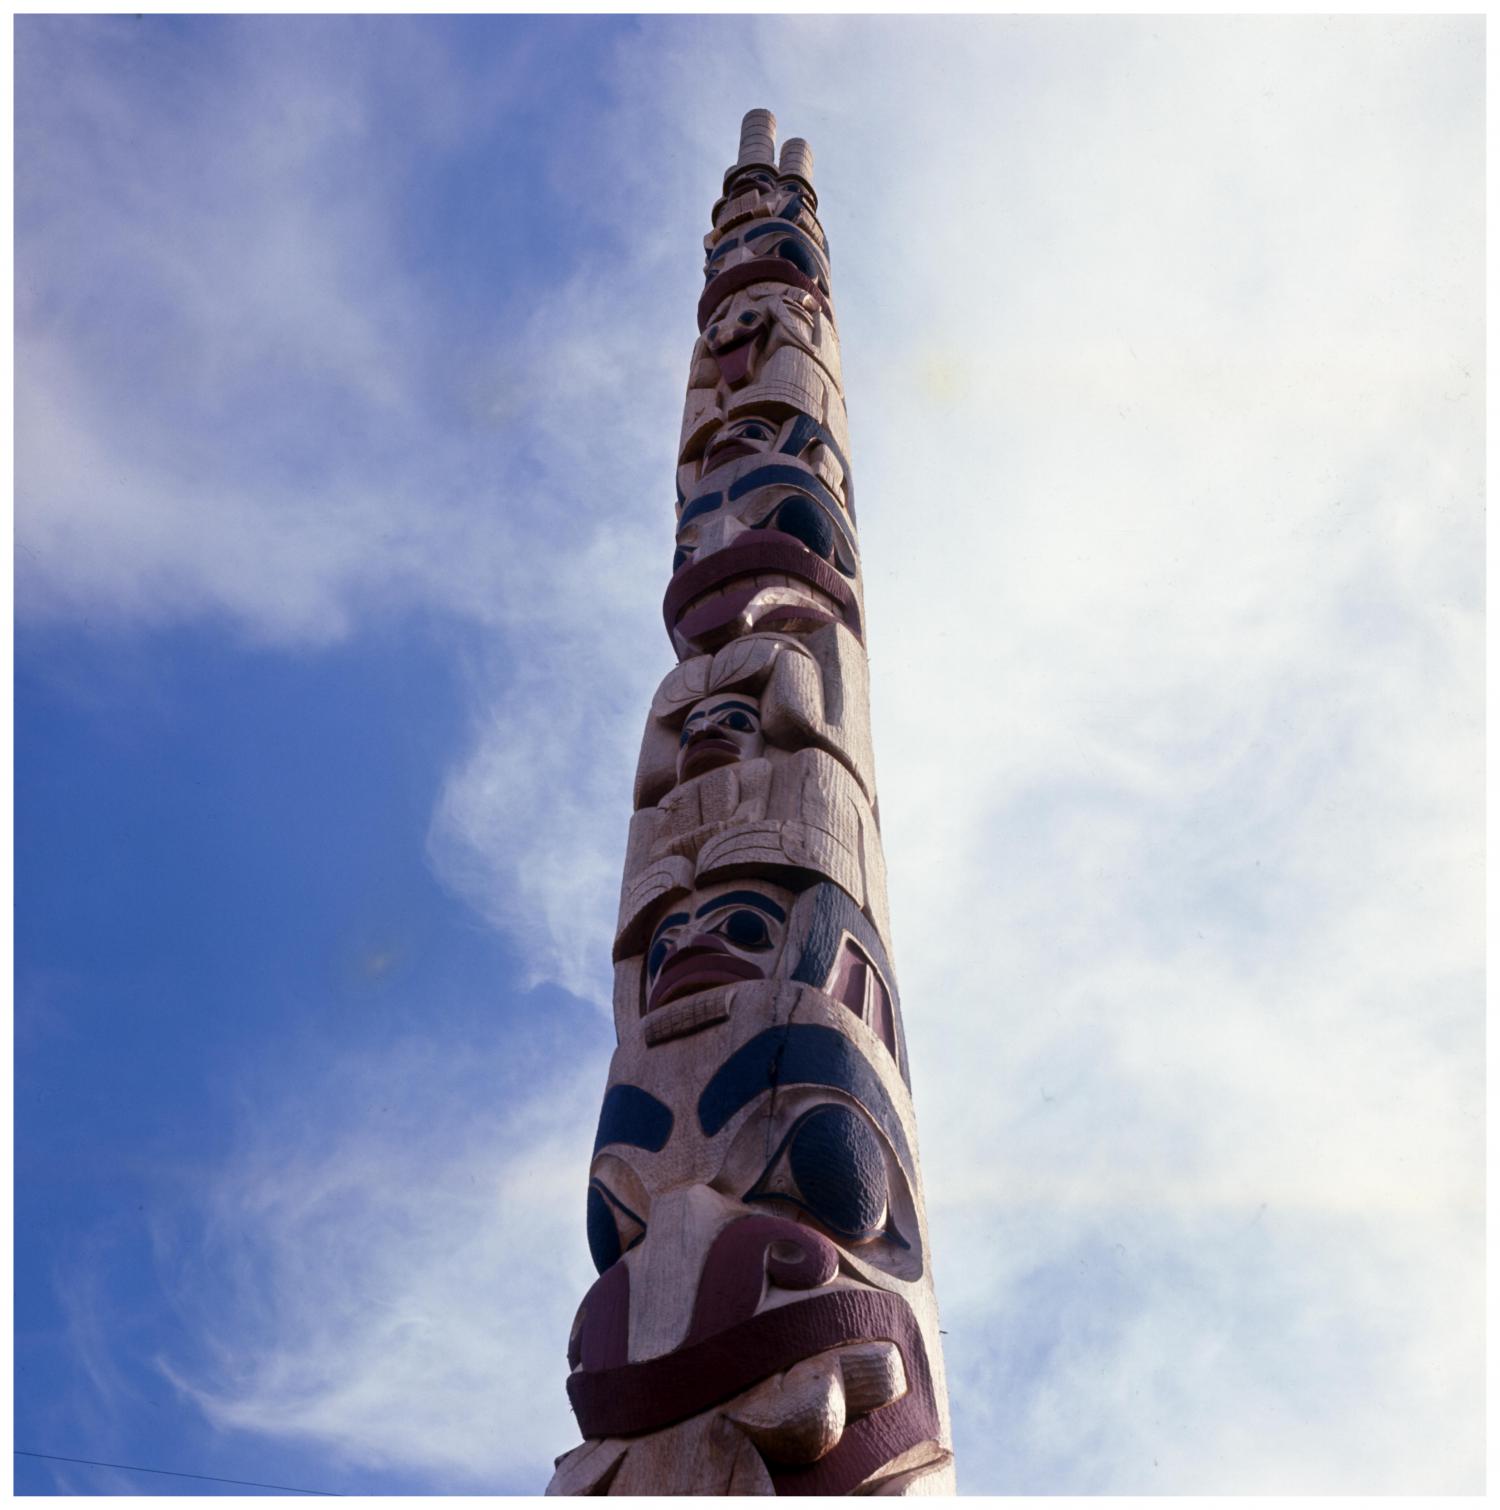 Image taken at a pole raising ceremony in Masset. The pole was carved by Robert Davidson, Jr. This image shows the pole after it has been erected.